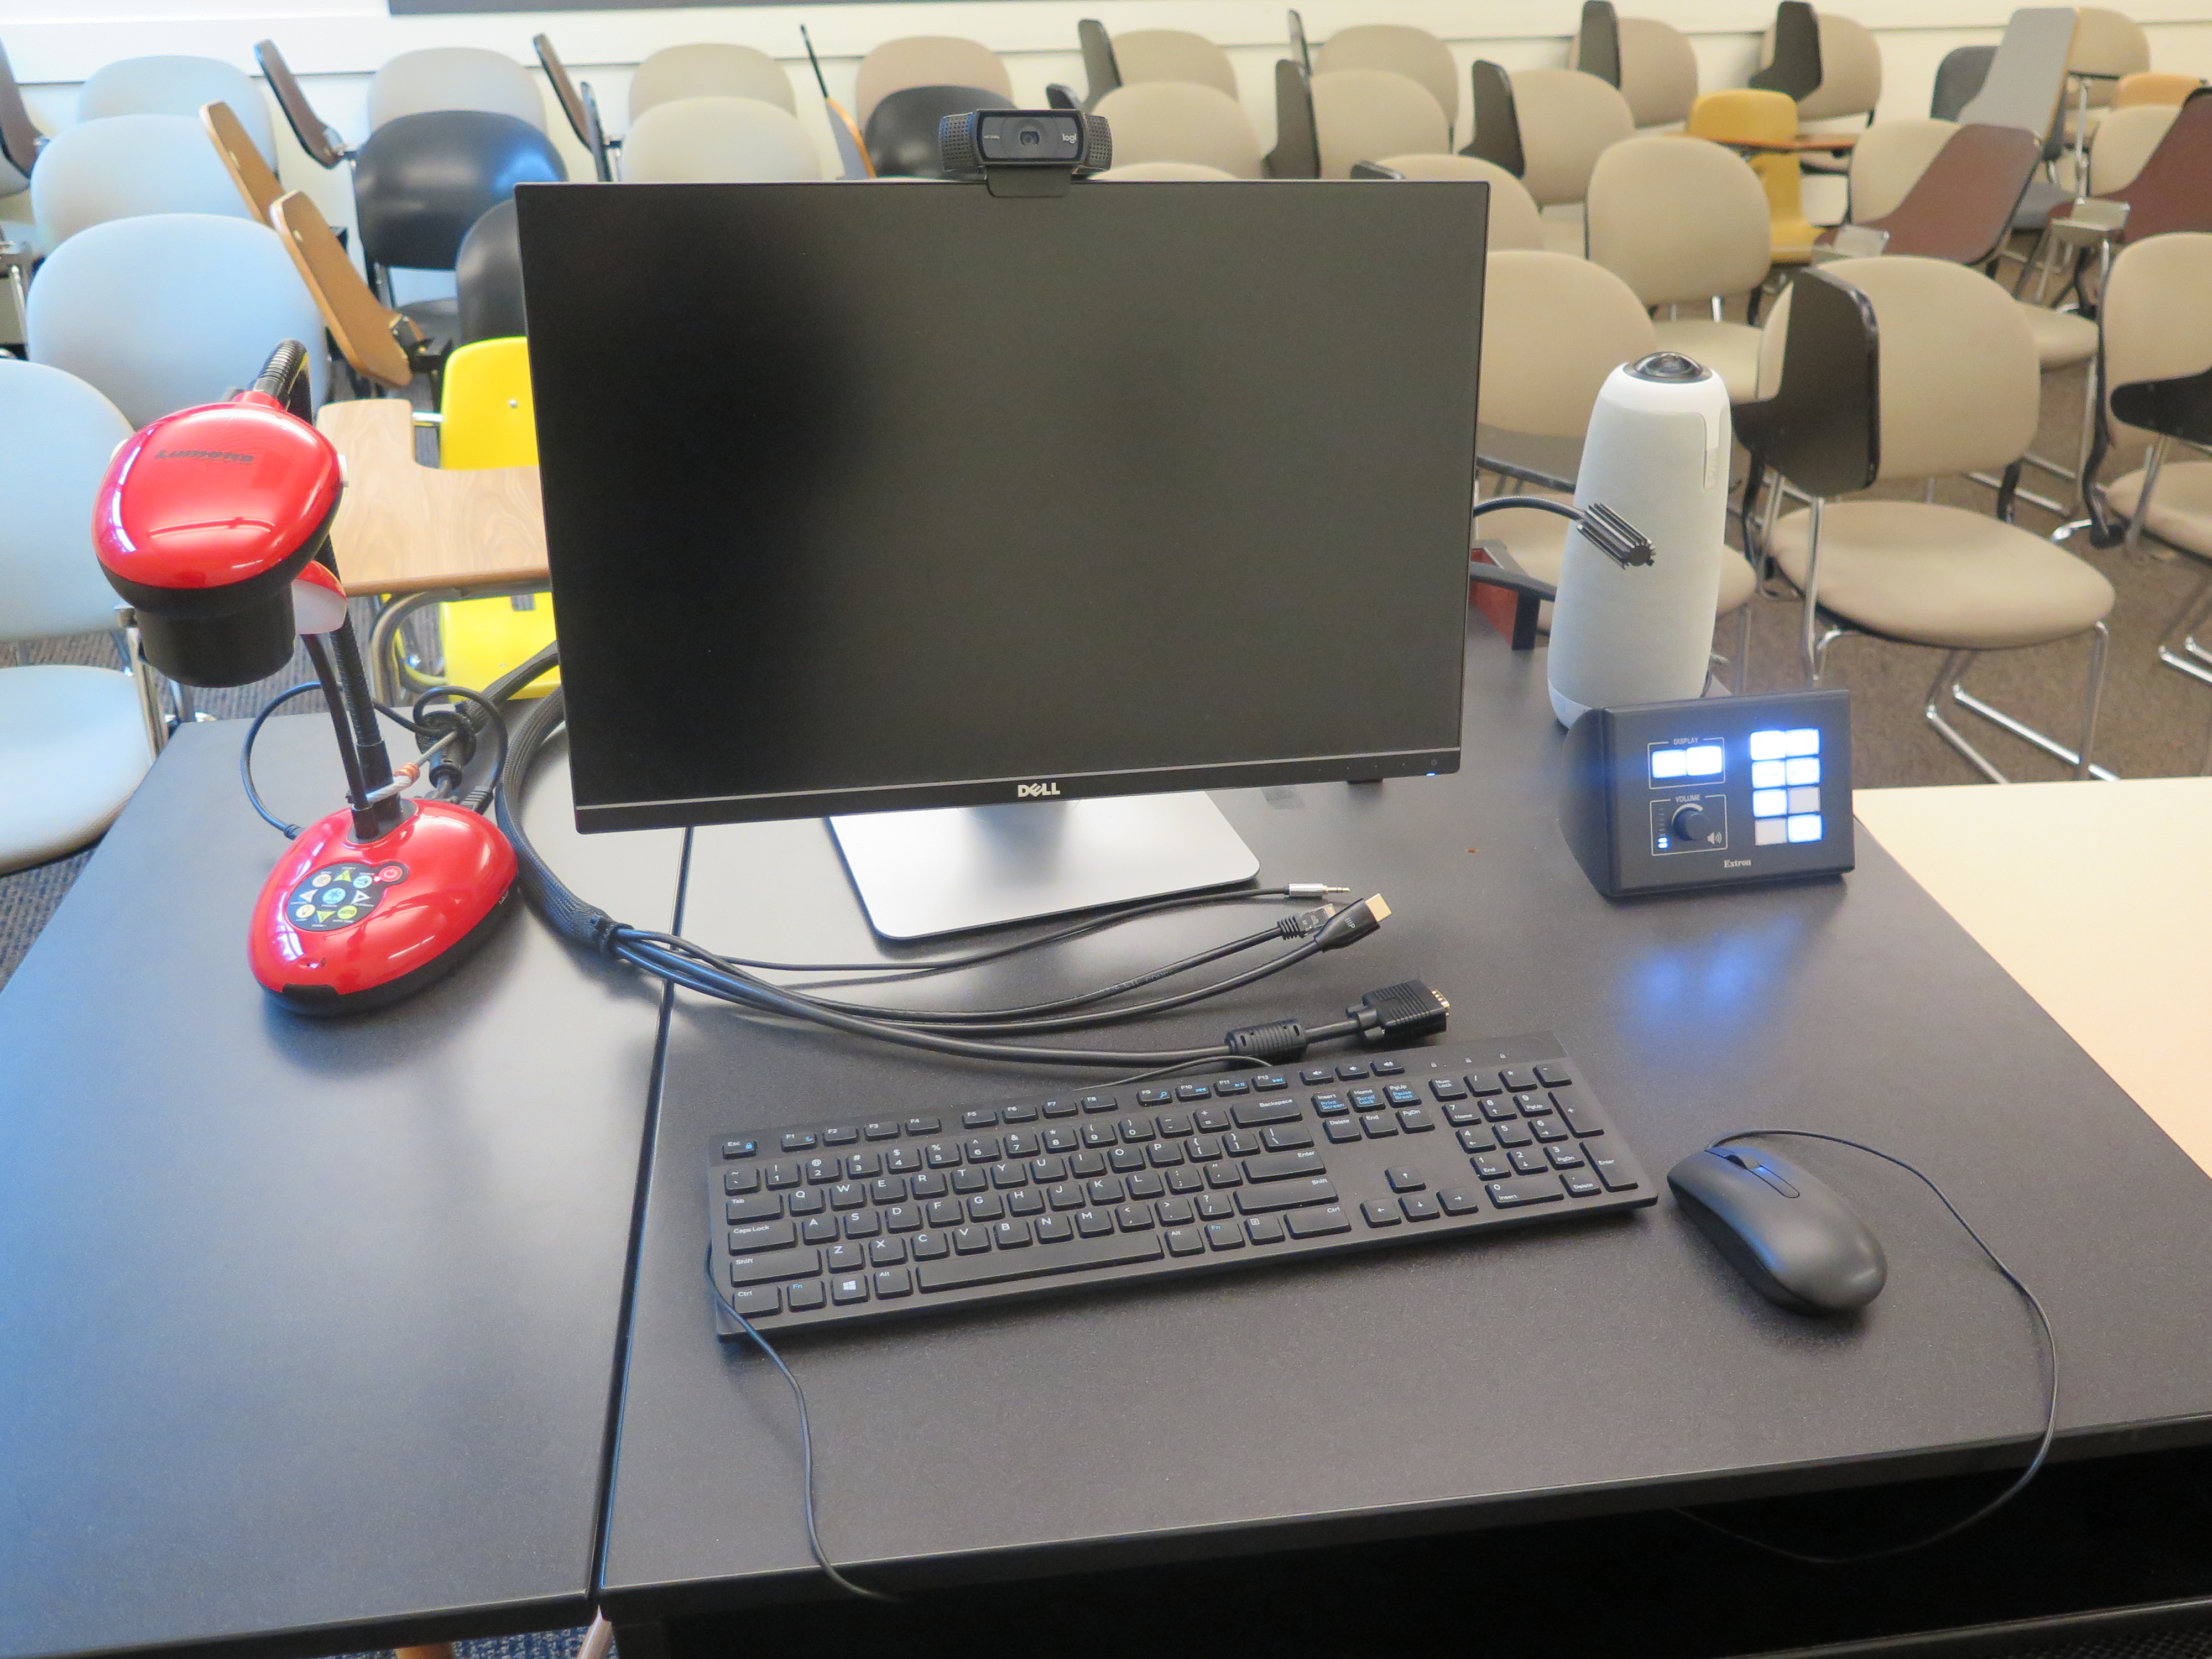 Top of podium is Owl Camera, Logitech 920 webcam, Dell computer monitor, AV push button controller, Lumens Ladybug document camera, HDMI connection 